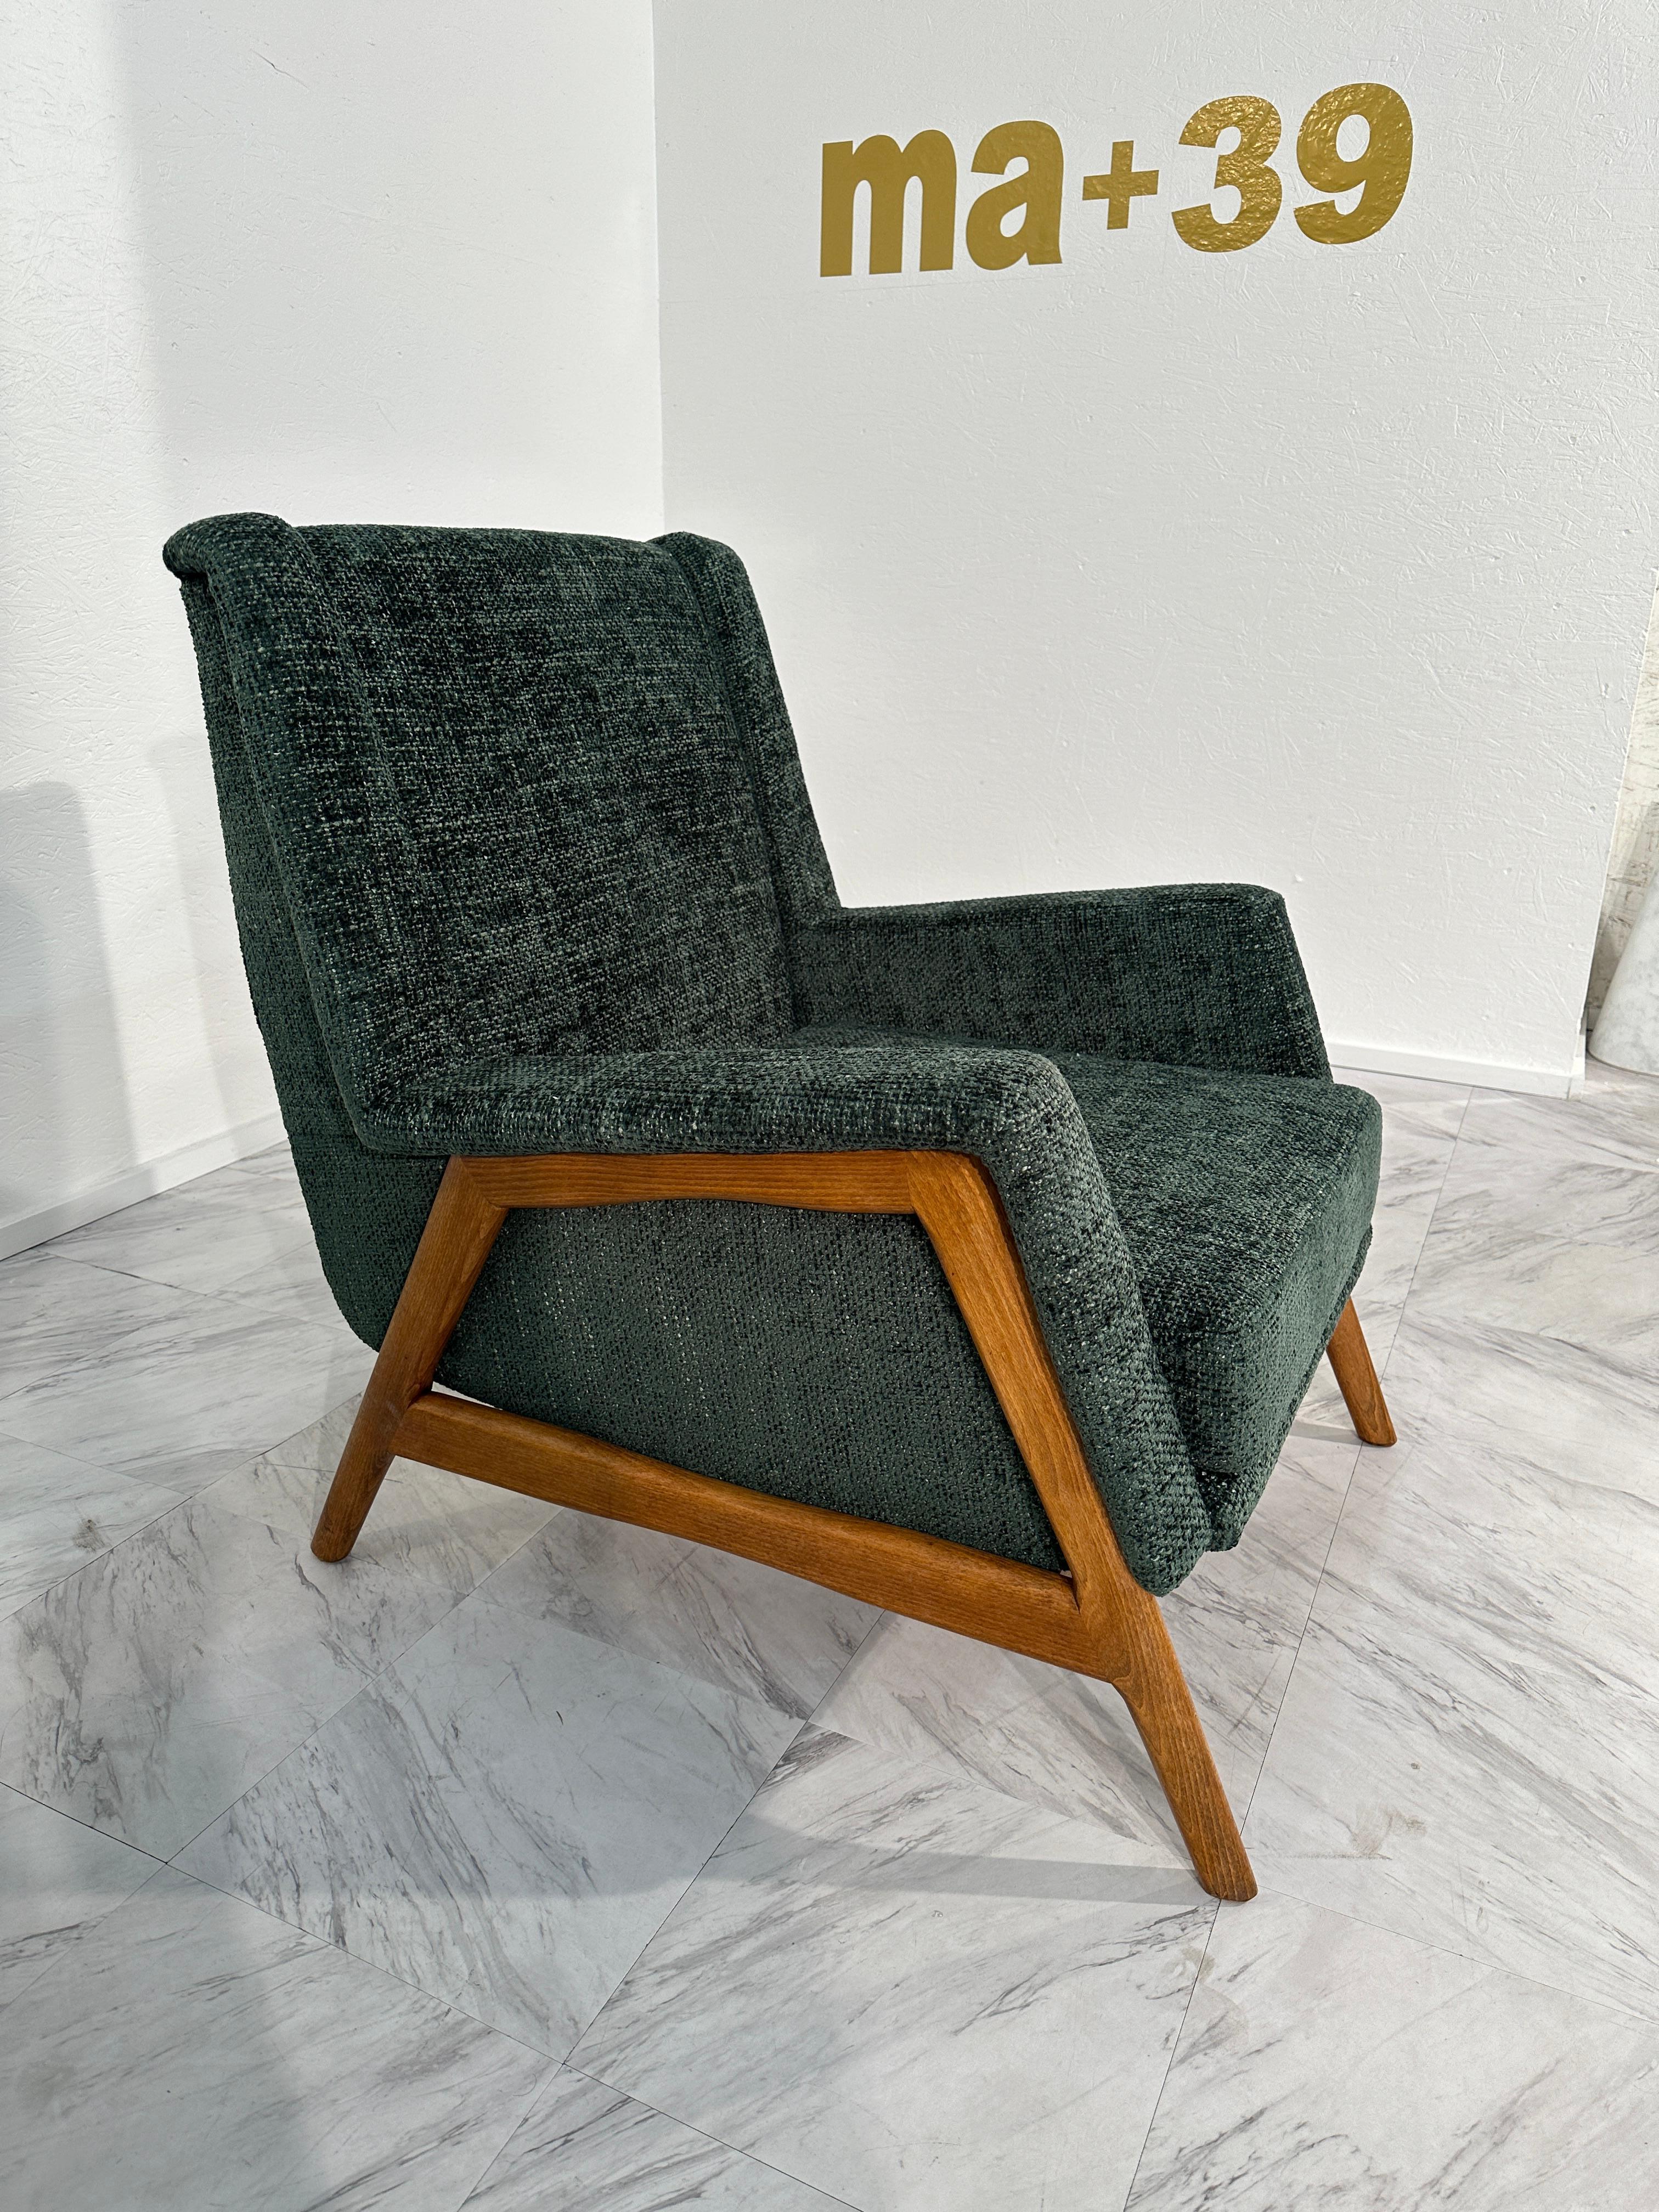 The Pair of 2 Italian Contemporary Armchairs from the 1970s encapsulates the innovative and avant-garde spirit of Italian design during that era. With their sleek lines and bold shapes, these armchairs showcase a perfect blend of form and function.